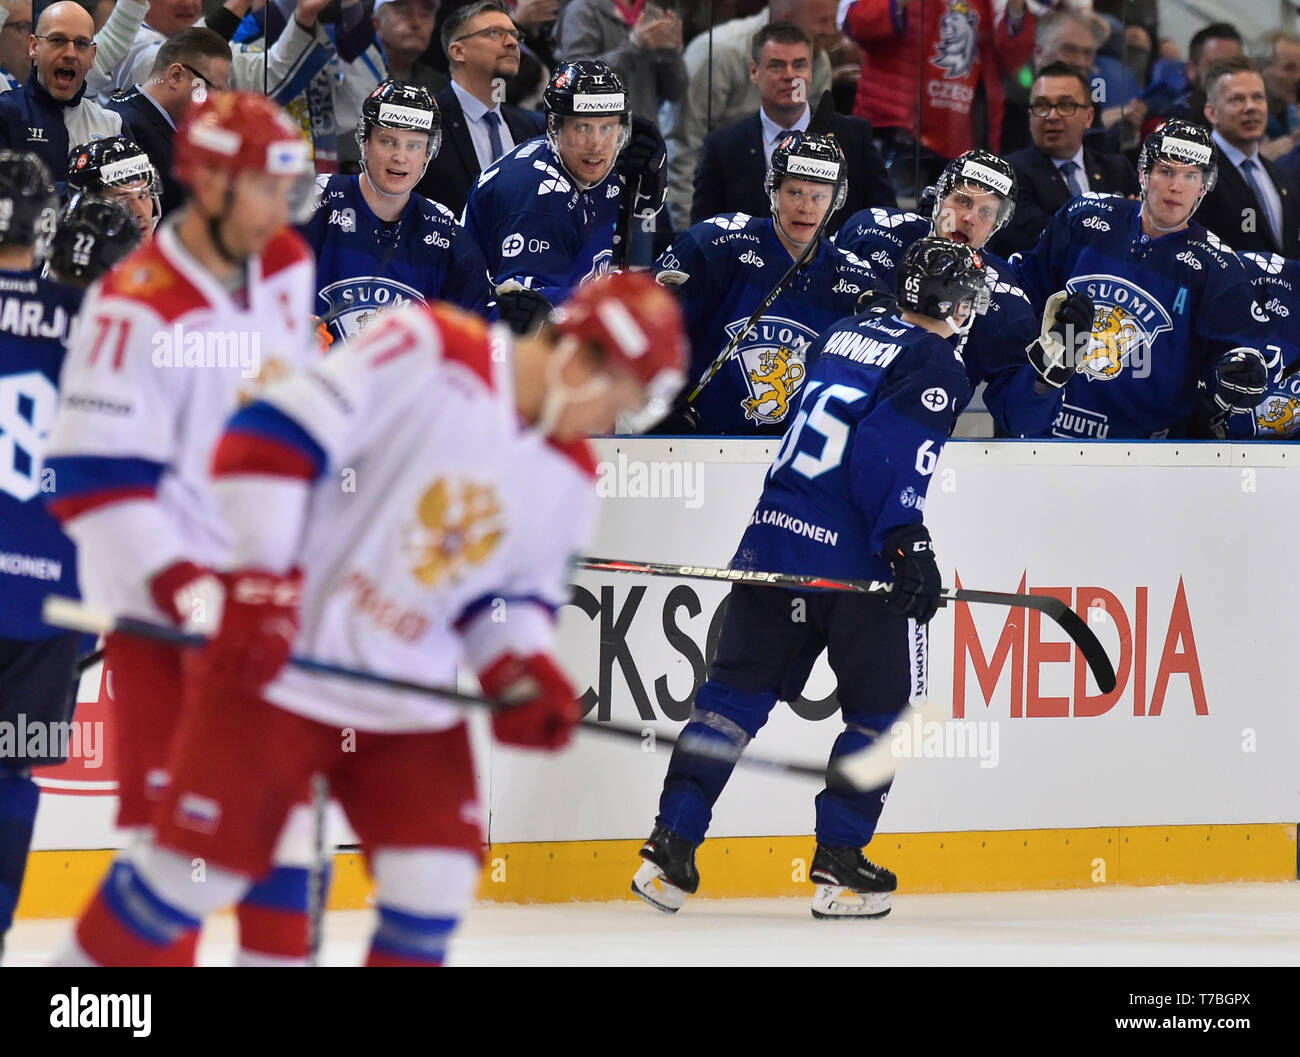 Brno, Czech Republic. 04th May, 2019. Finnish players celebrate the third goal in the Russia vs Finland match within Carlson Hockey Games tournament, part of Euro Hockey Tour in Brno, Czech Republic, May 4, 2019. Credit: Lubos Pavlicek/CTK Photo/Alamy Live News Stock Photo